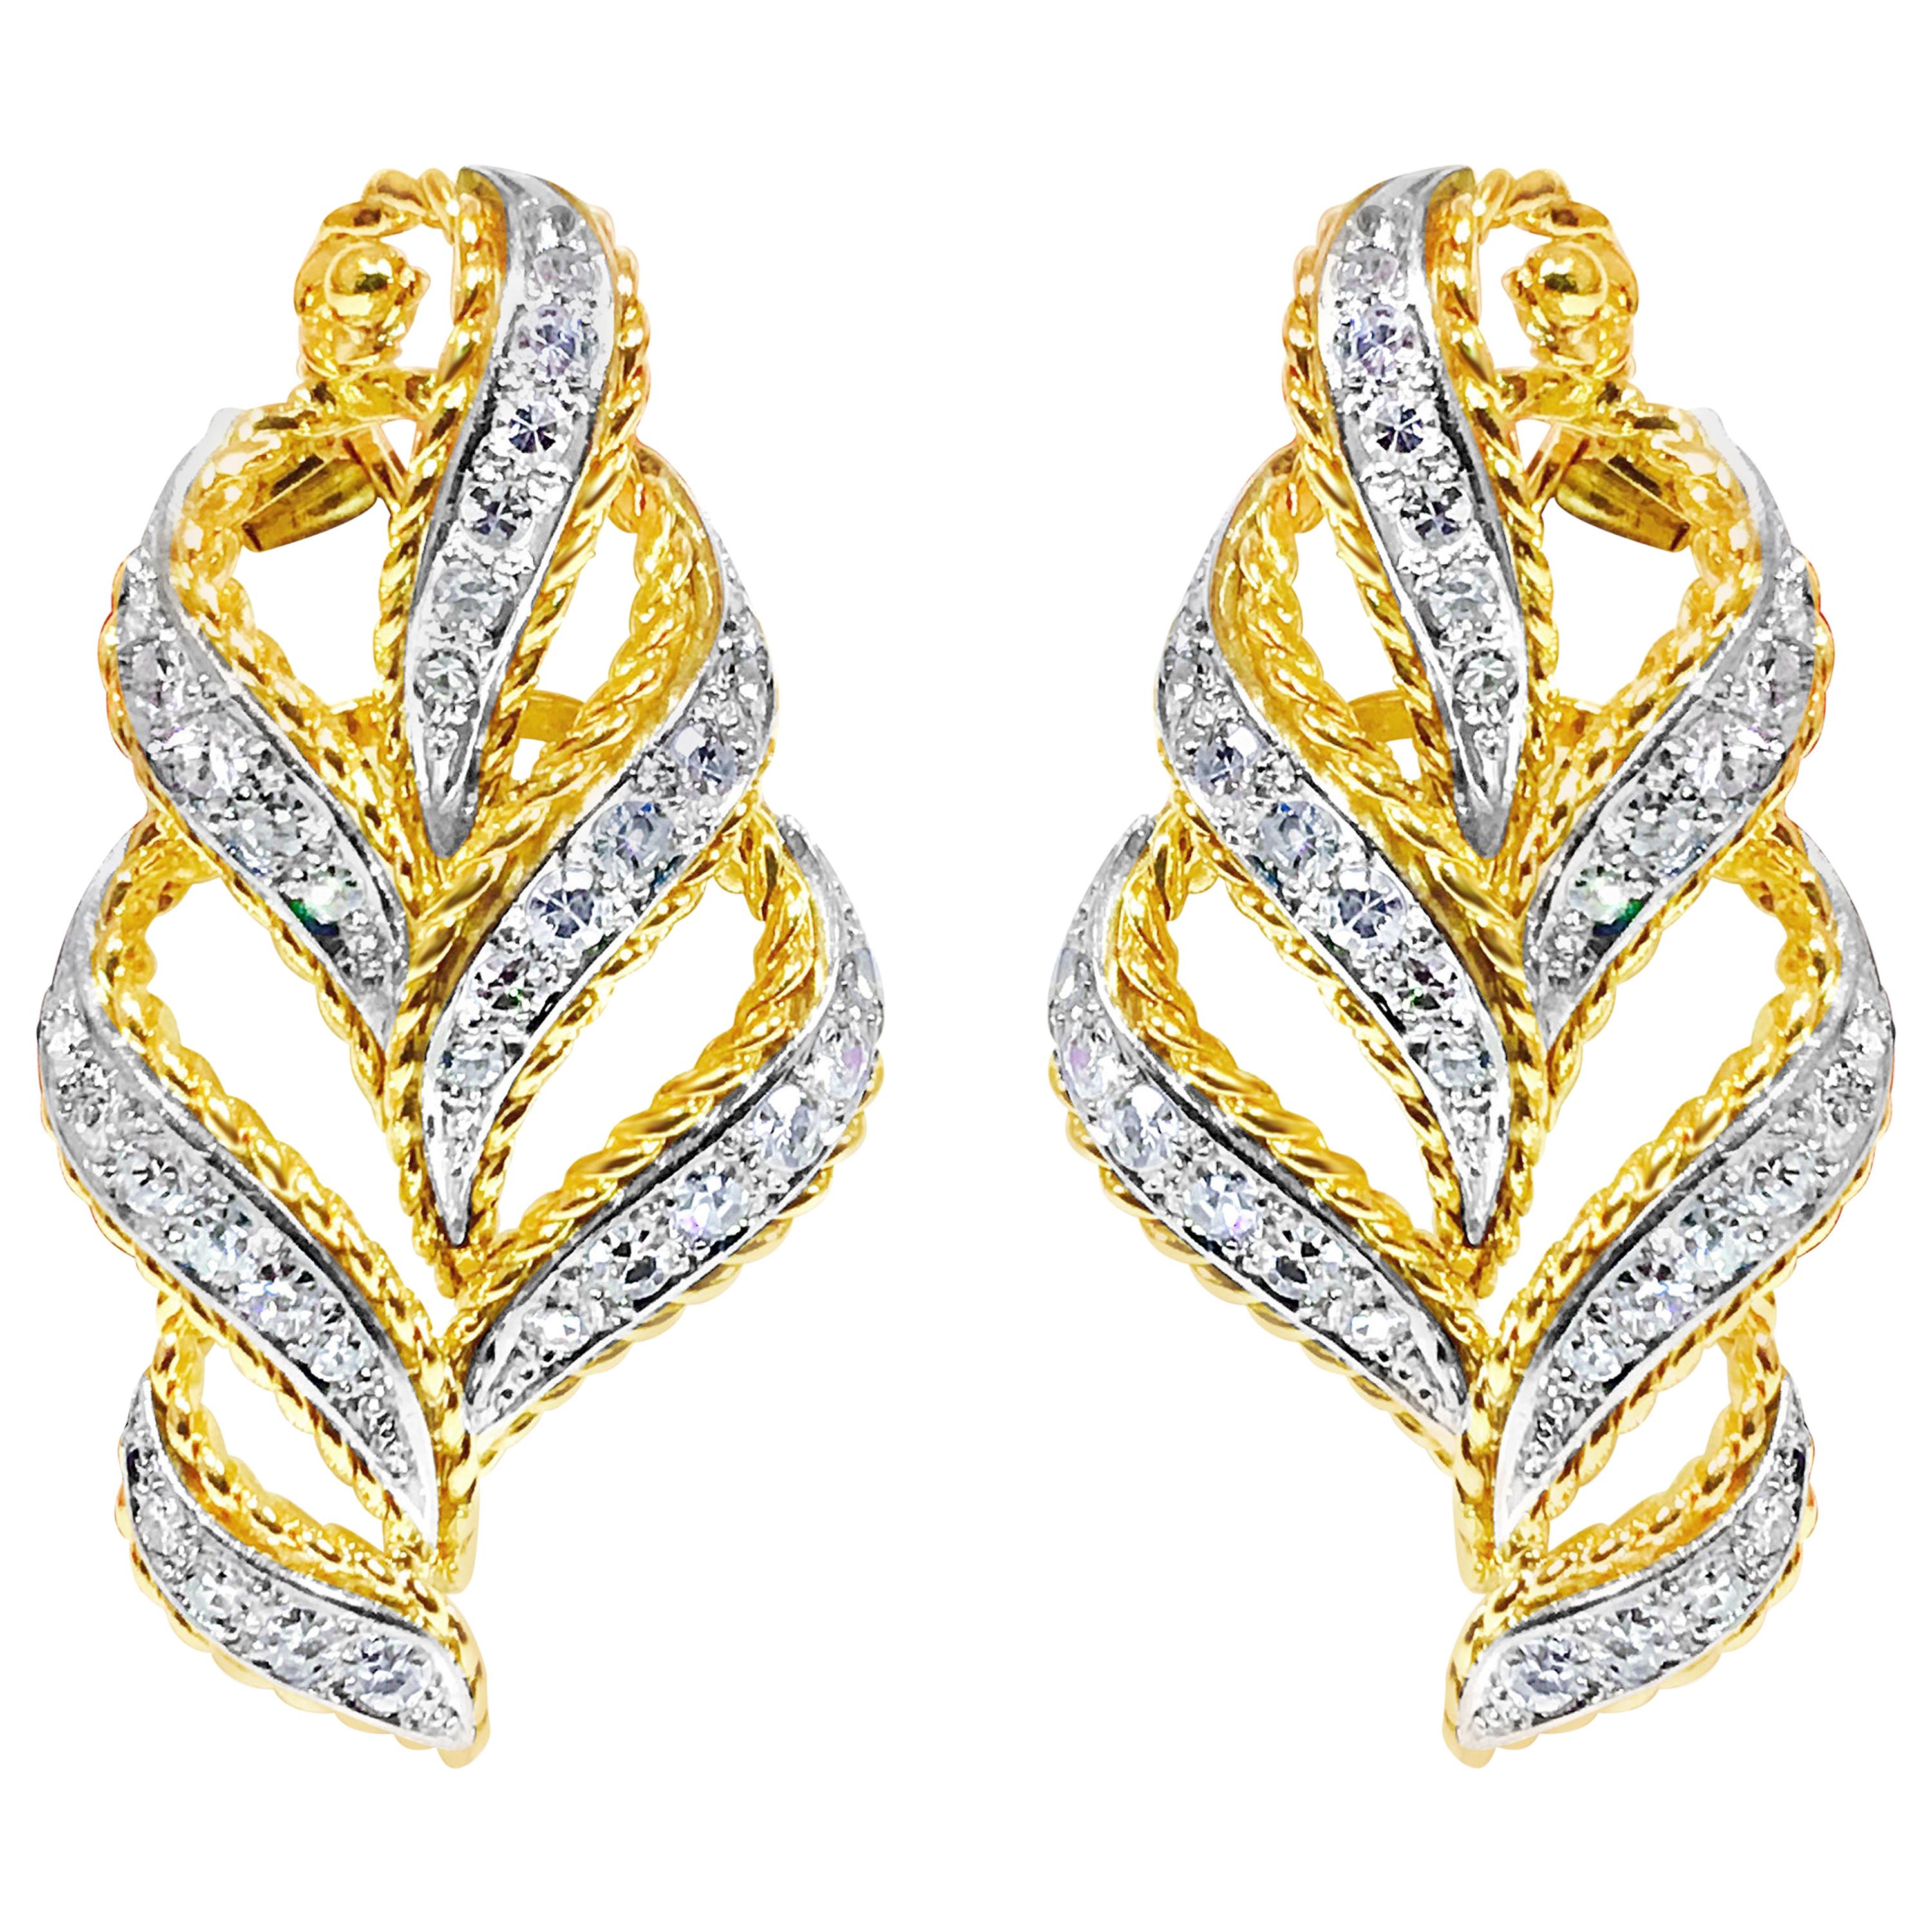 Contemporary 2.00 Carat Diamond Earrings in 18 Karat Yellow Gold For Sale